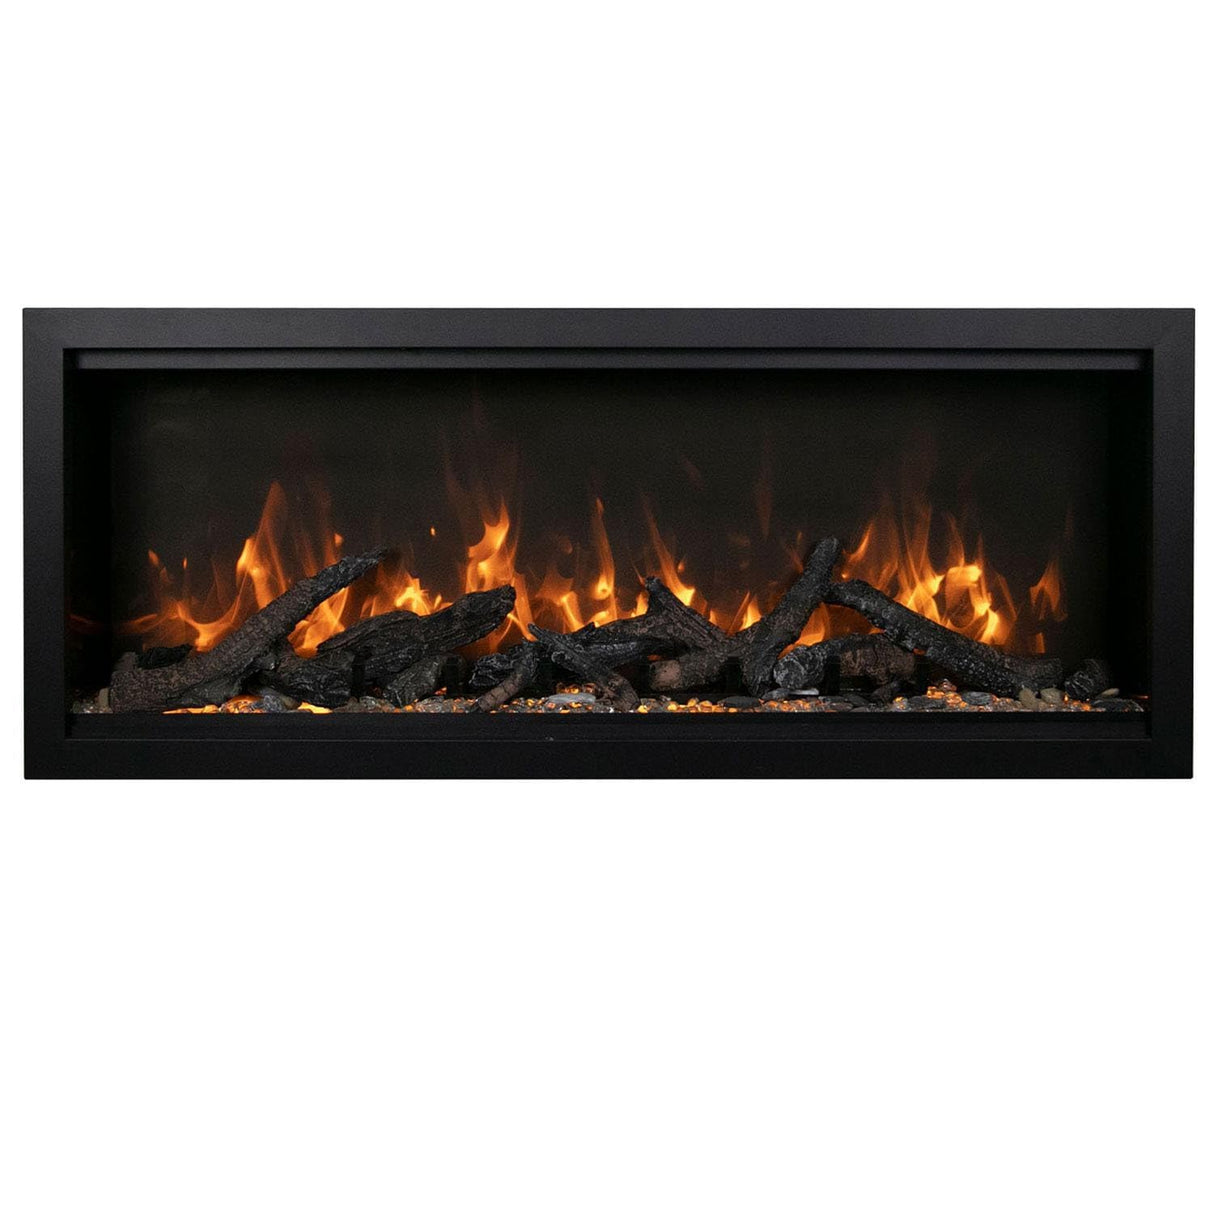 Amantii SYM-50-BESPOKE Symmetry Bespoke - 50" Indoor / Outdoor Electric Built In Fireplace featuring, WiFi Compatibilty & Bluetooth Connectivity, MultiFunction Remote, and a Selection of Media Options